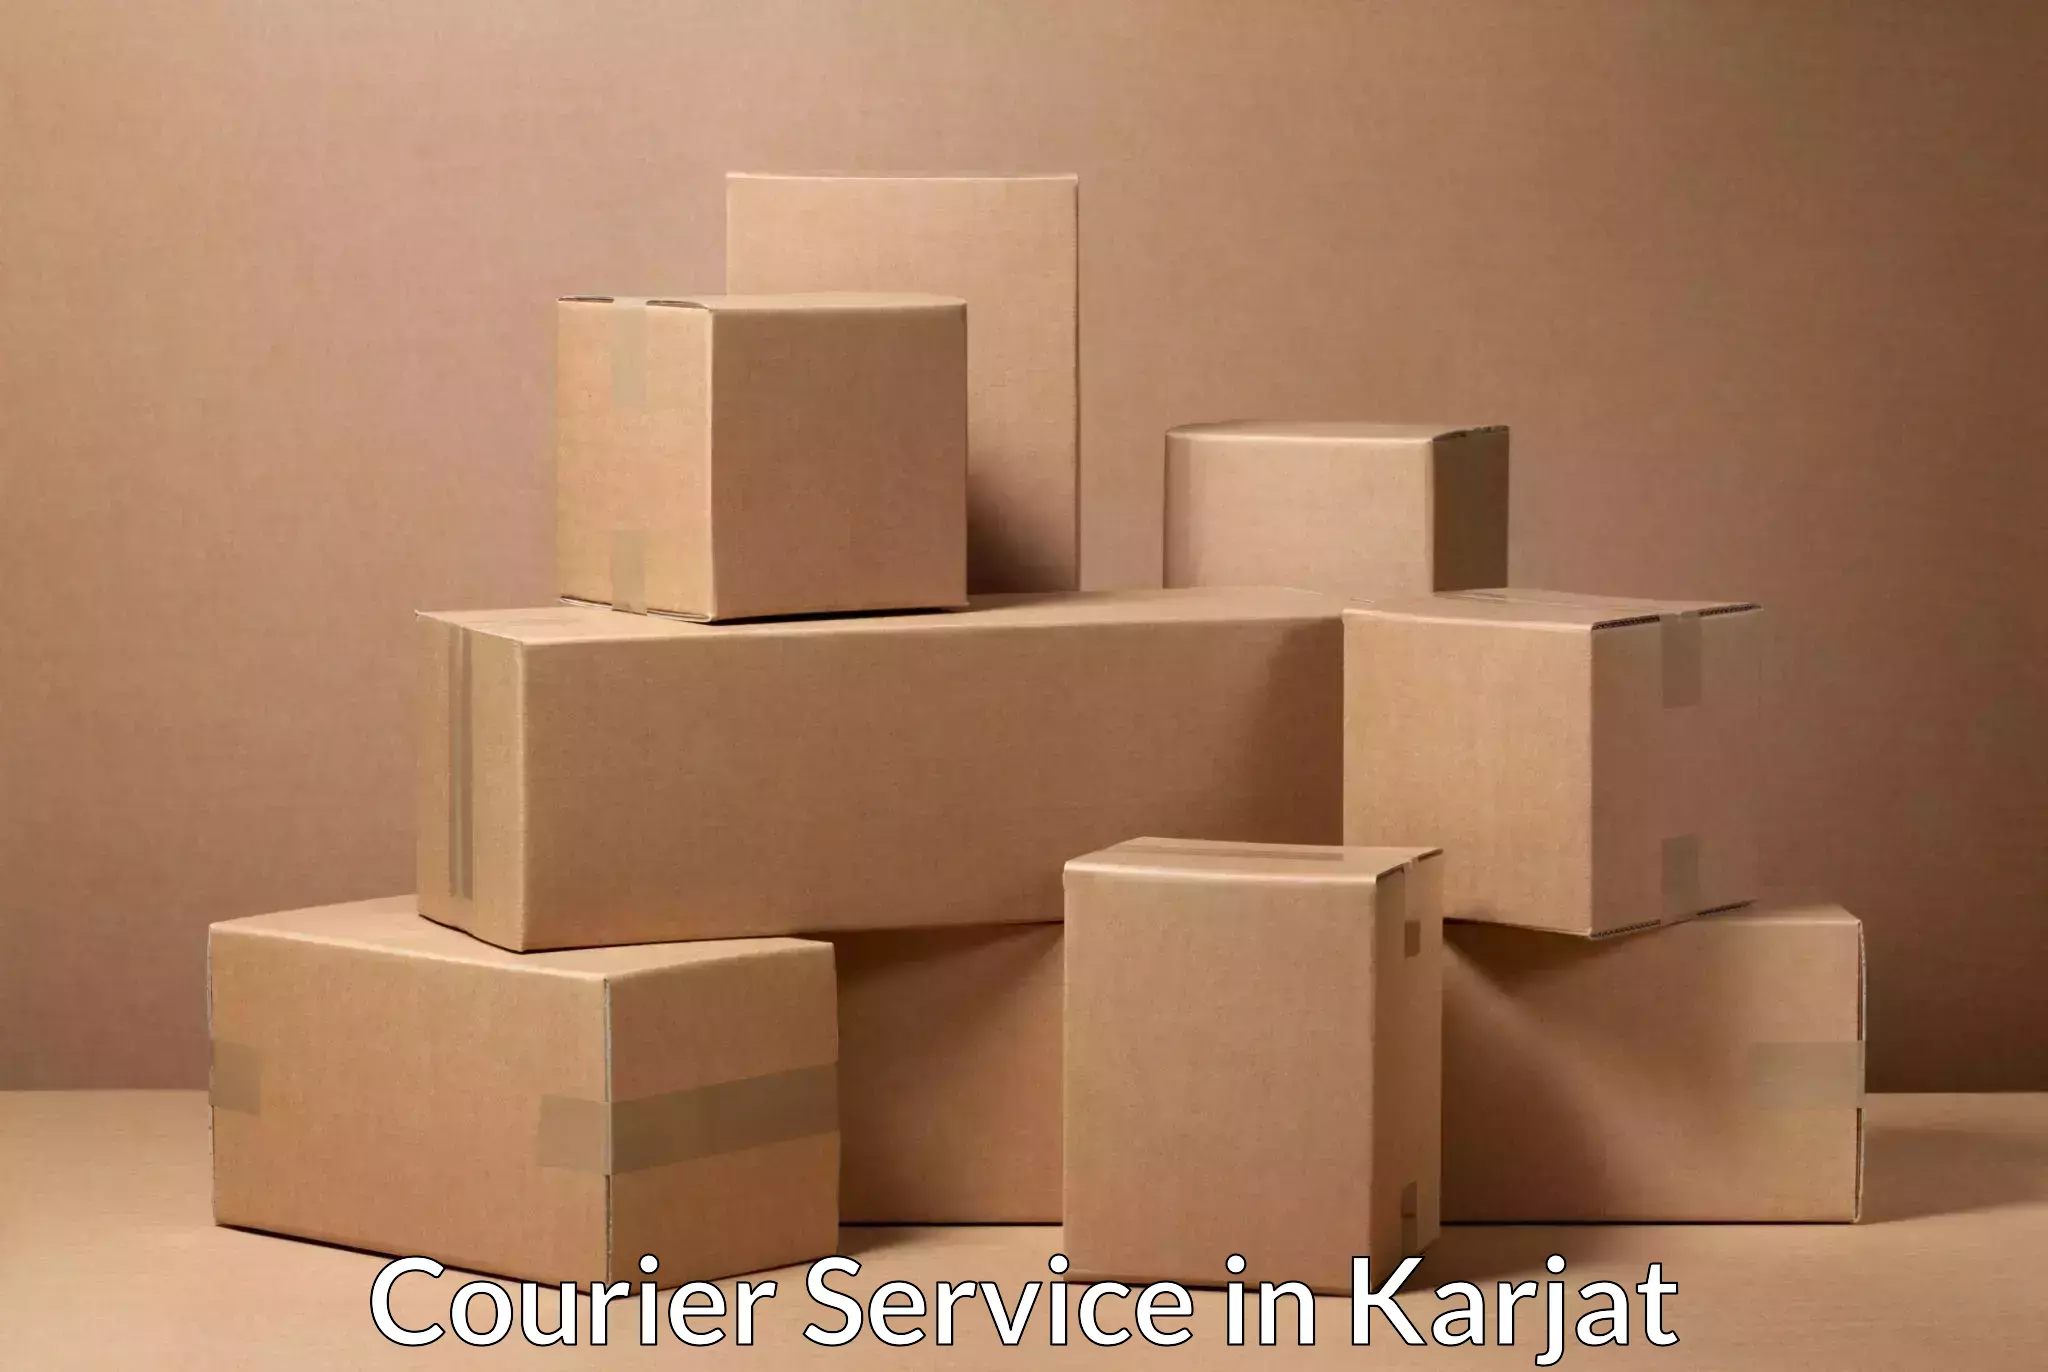 Customer-oriented courier services in Karjat